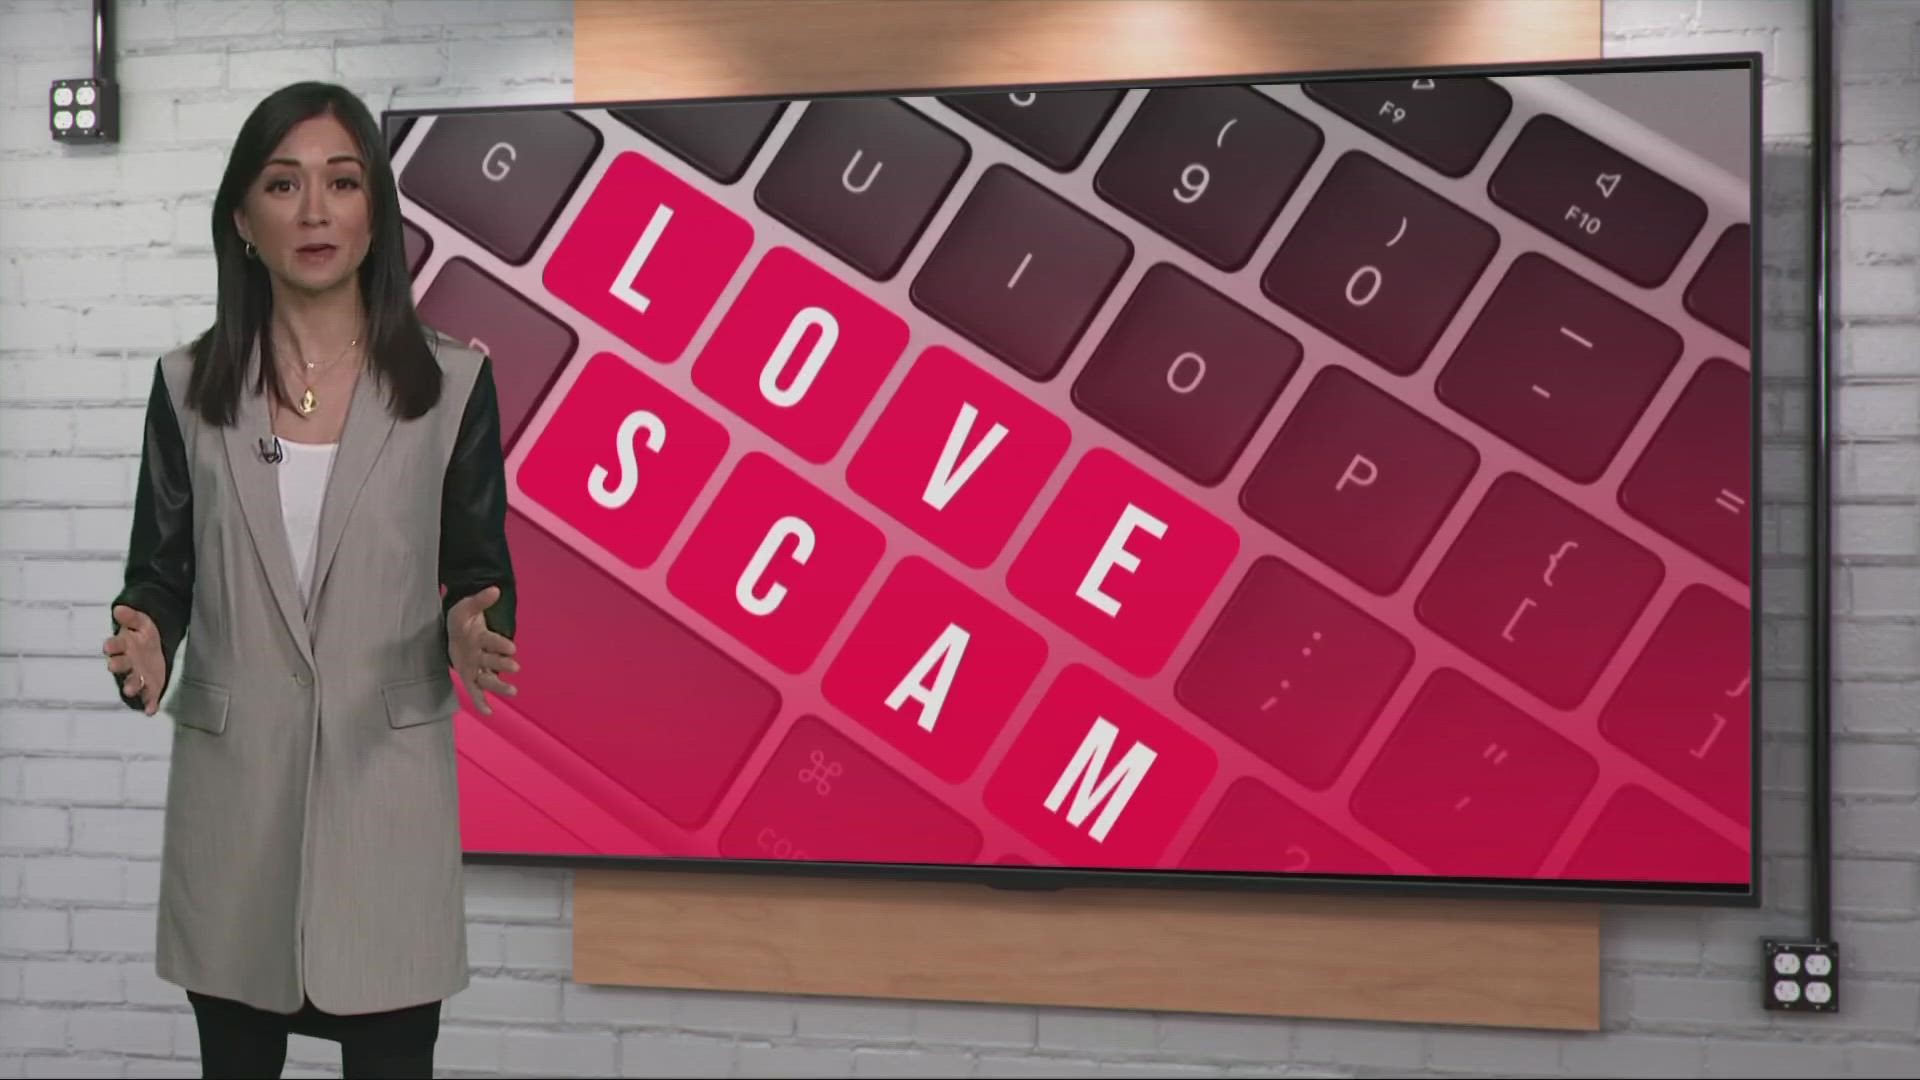 Valentine’s Day is right around the corner, but scammers prey on people looking for love online all year round. Here’s how to avoid falling victim to a romance scam.